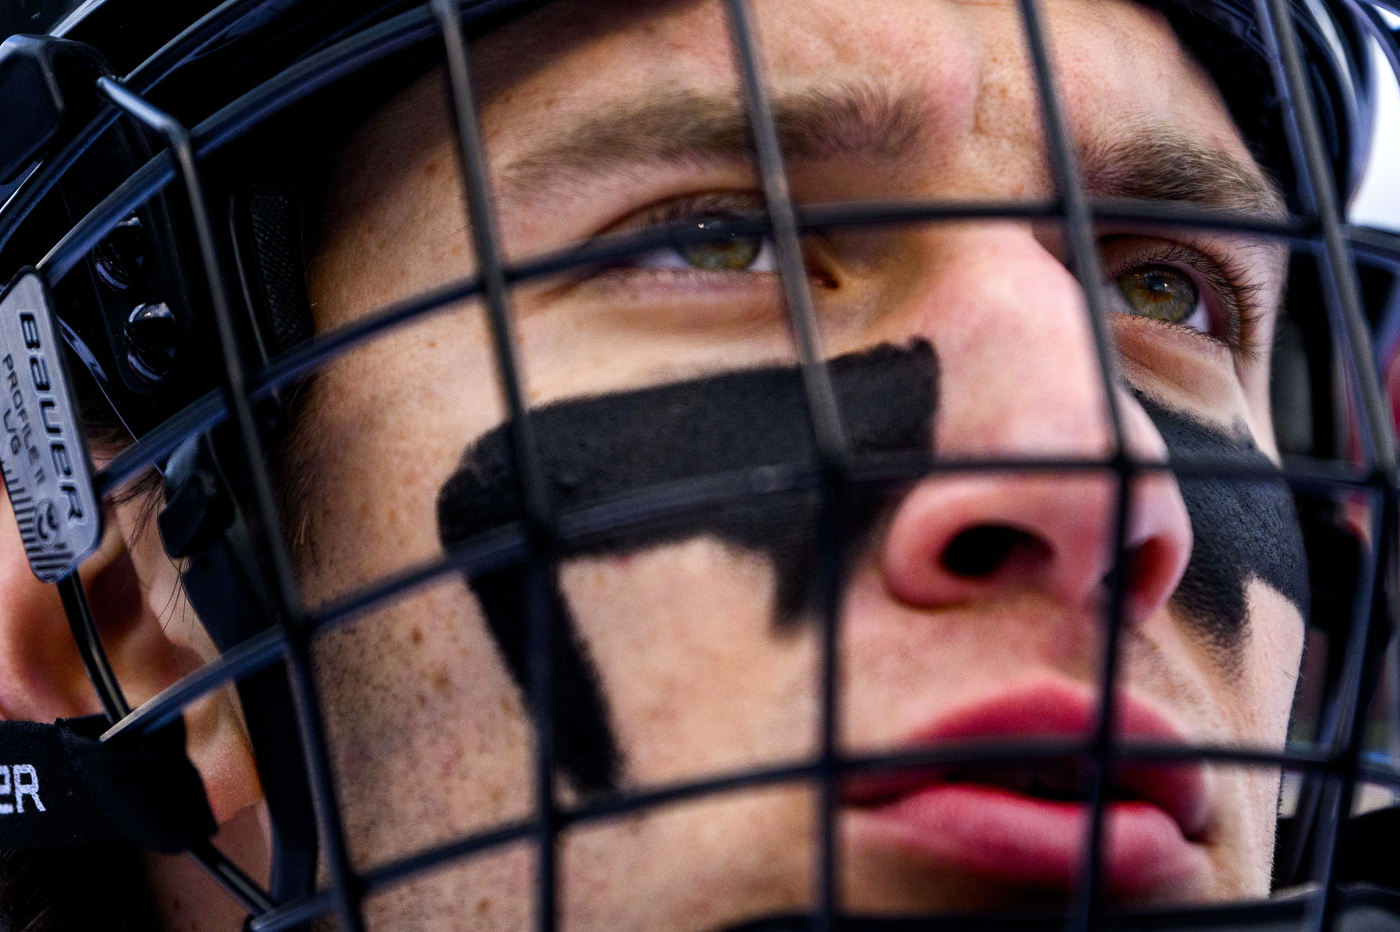 A close-up image of a hockey player's face. 